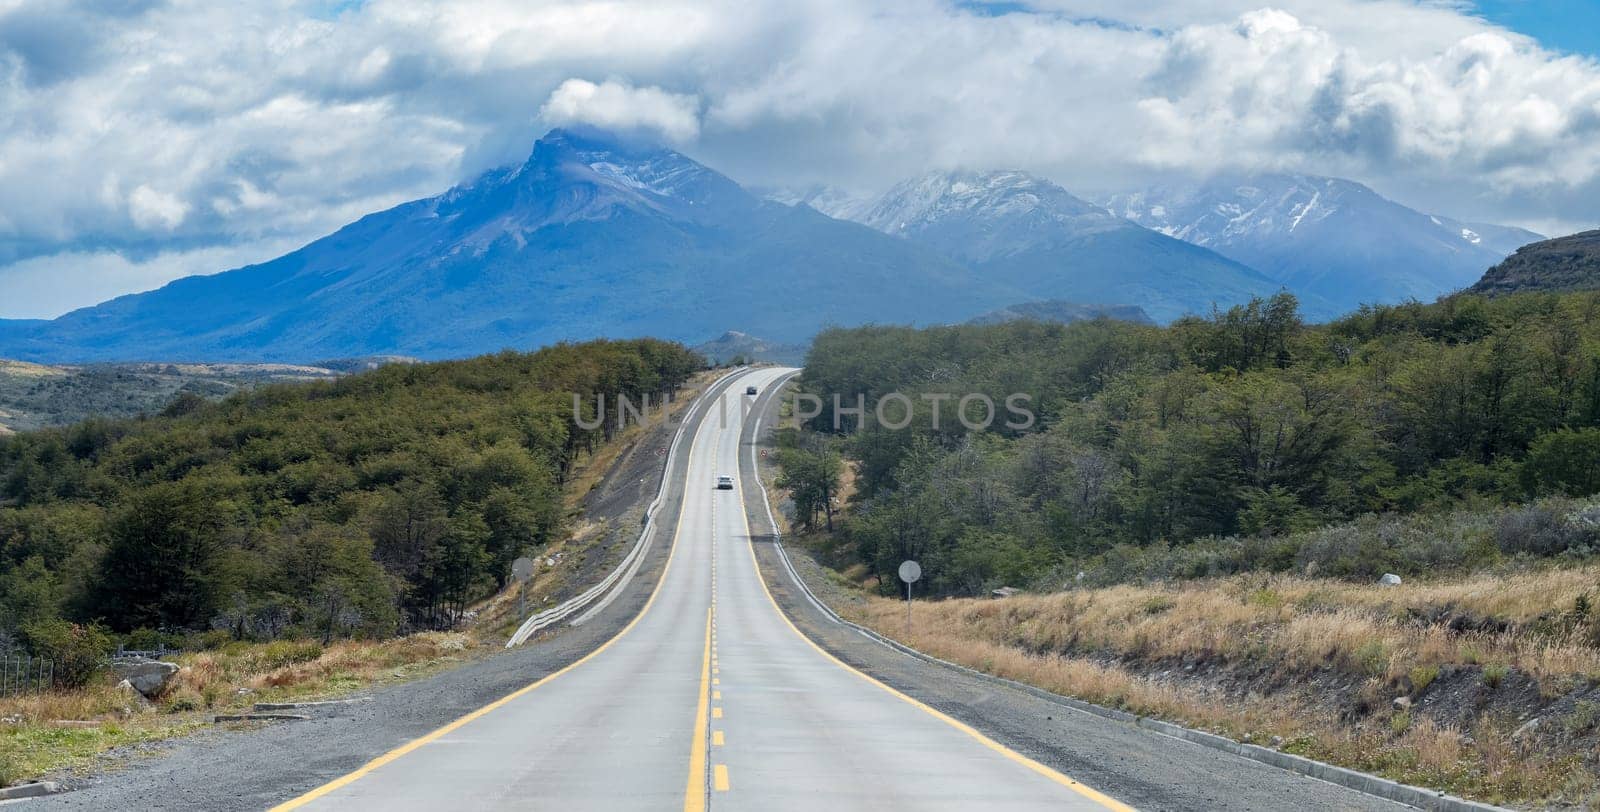 Scenic Open Road Leading To Snow-Capped Mountains by FerradalFCG